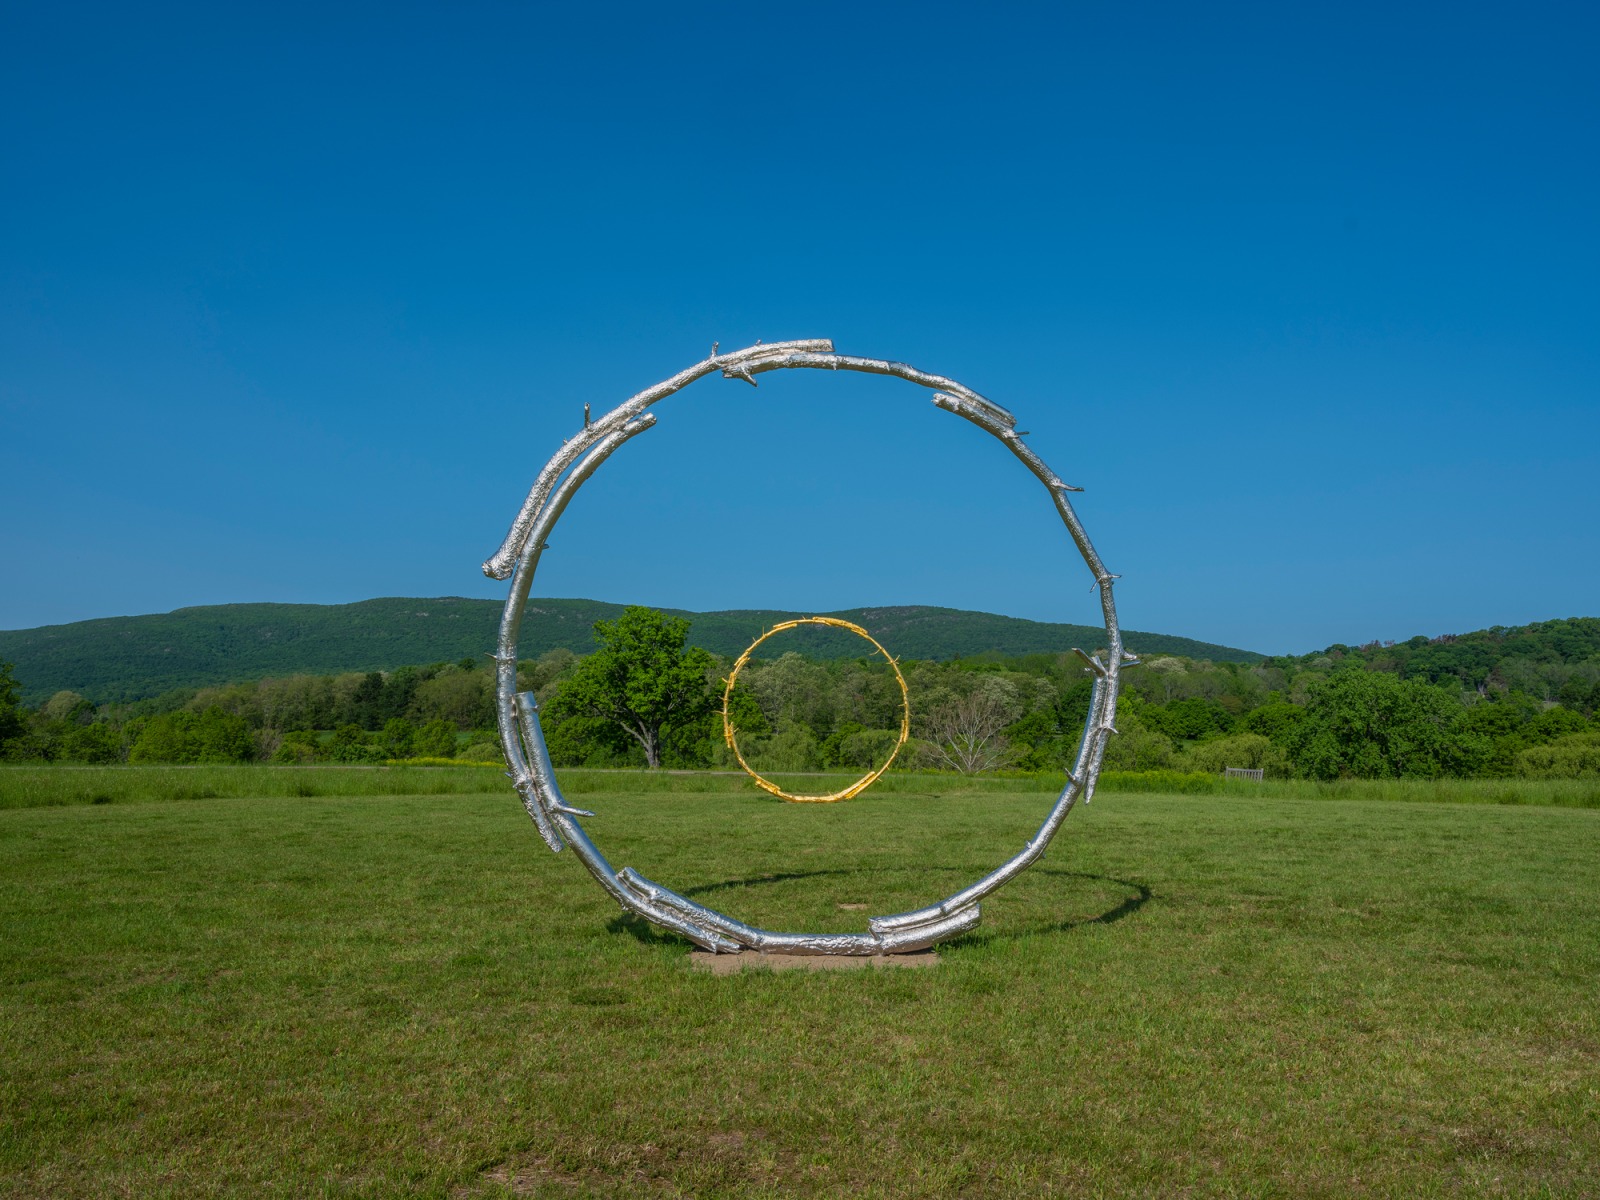 <div class="image_caption_container"><div class="image_caption"><p>Exhibition view: Ugo Rondinone, <b>the sun and the moon</b>, Storm King Art Center, New Windsor, New York, 2023. Photo © Jeffery Jenkins</p></div></div>